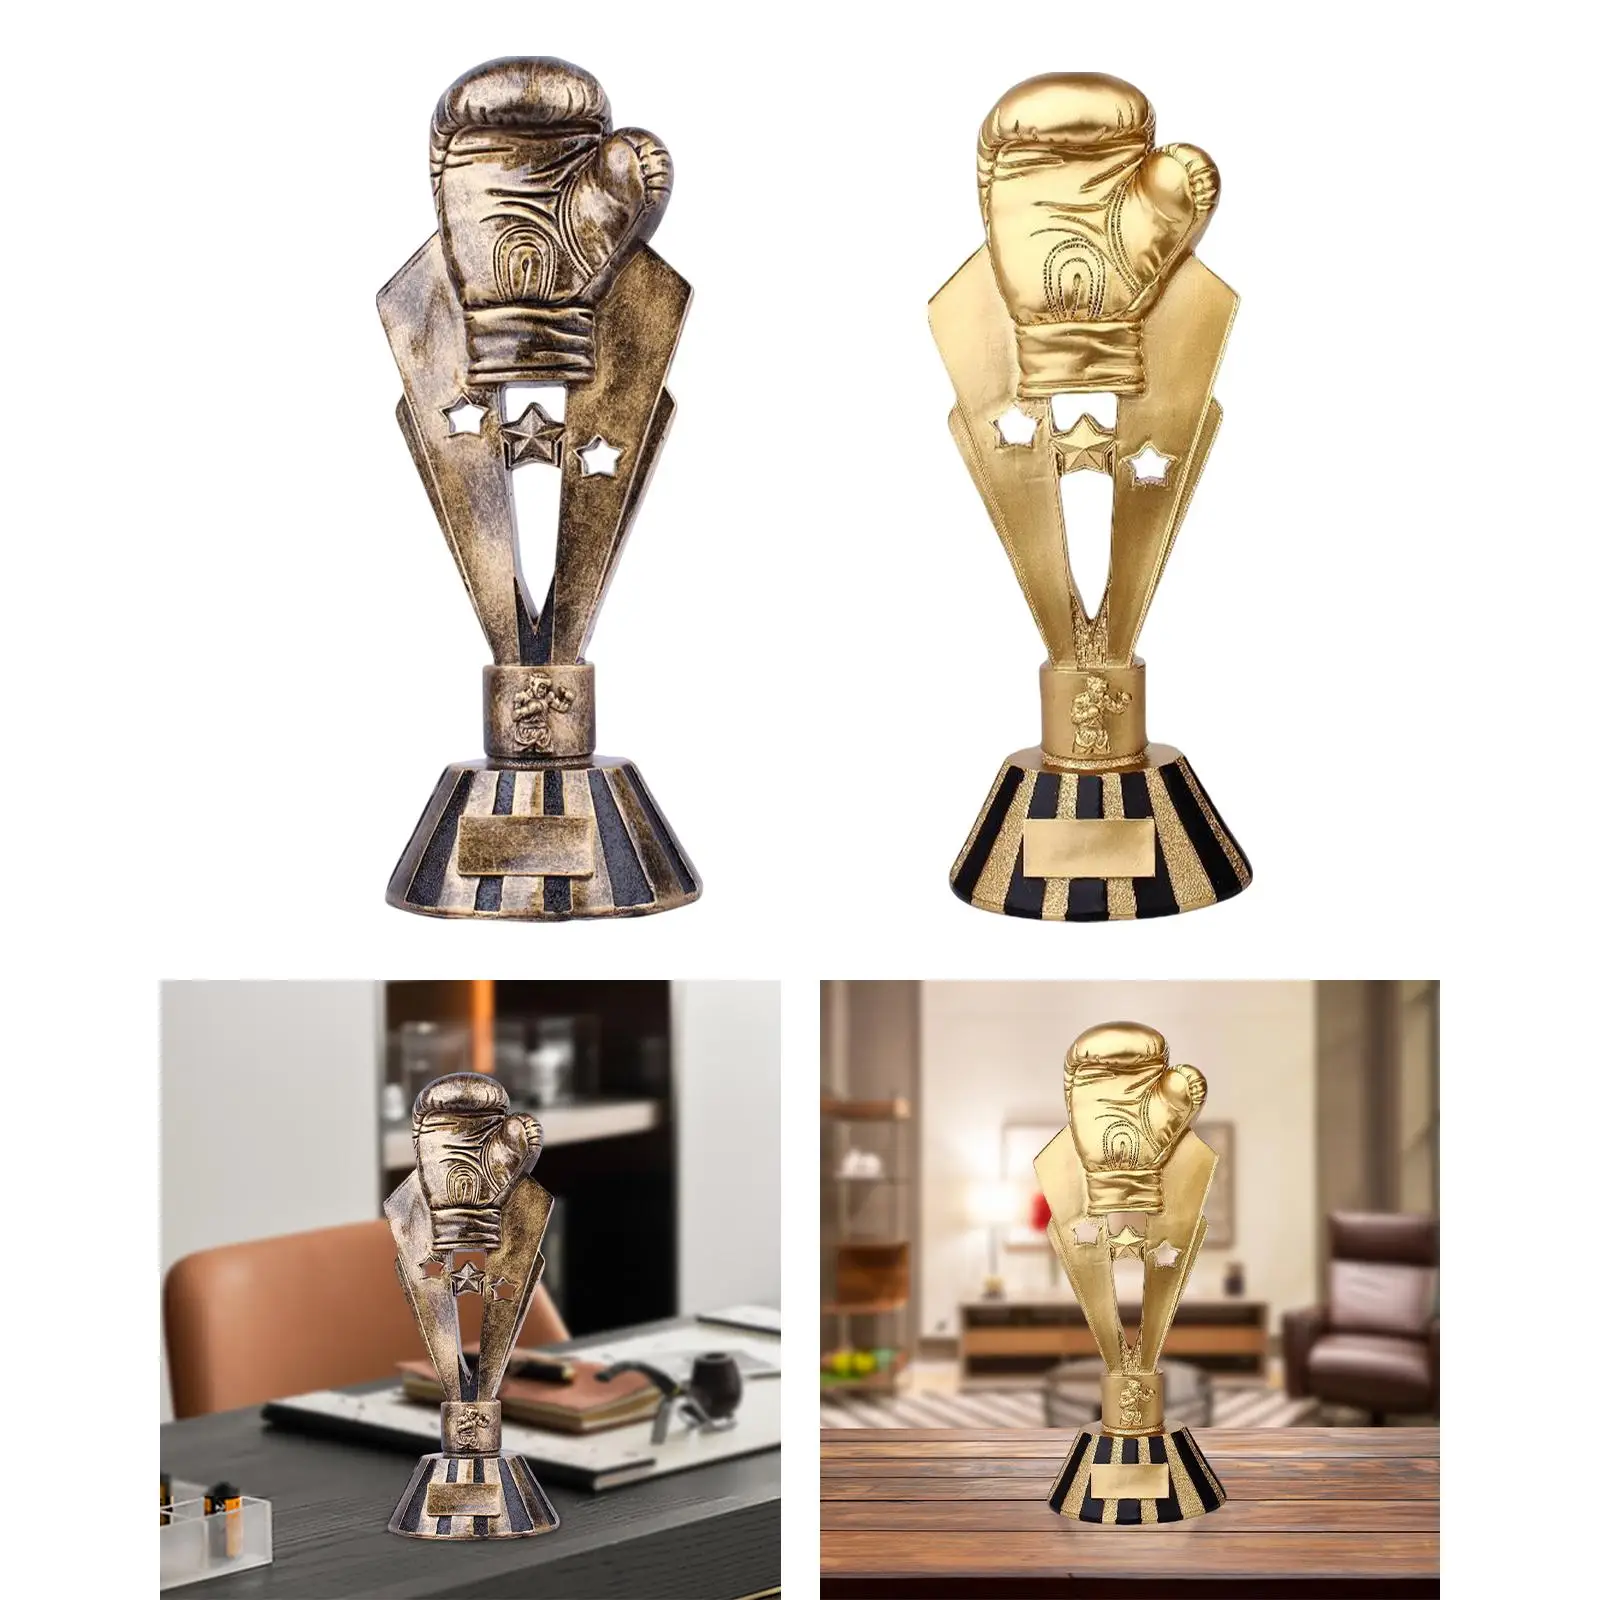 Boxing Trophy, Boxing Glove Sculpture Boxing Award Highly Detailed Resin